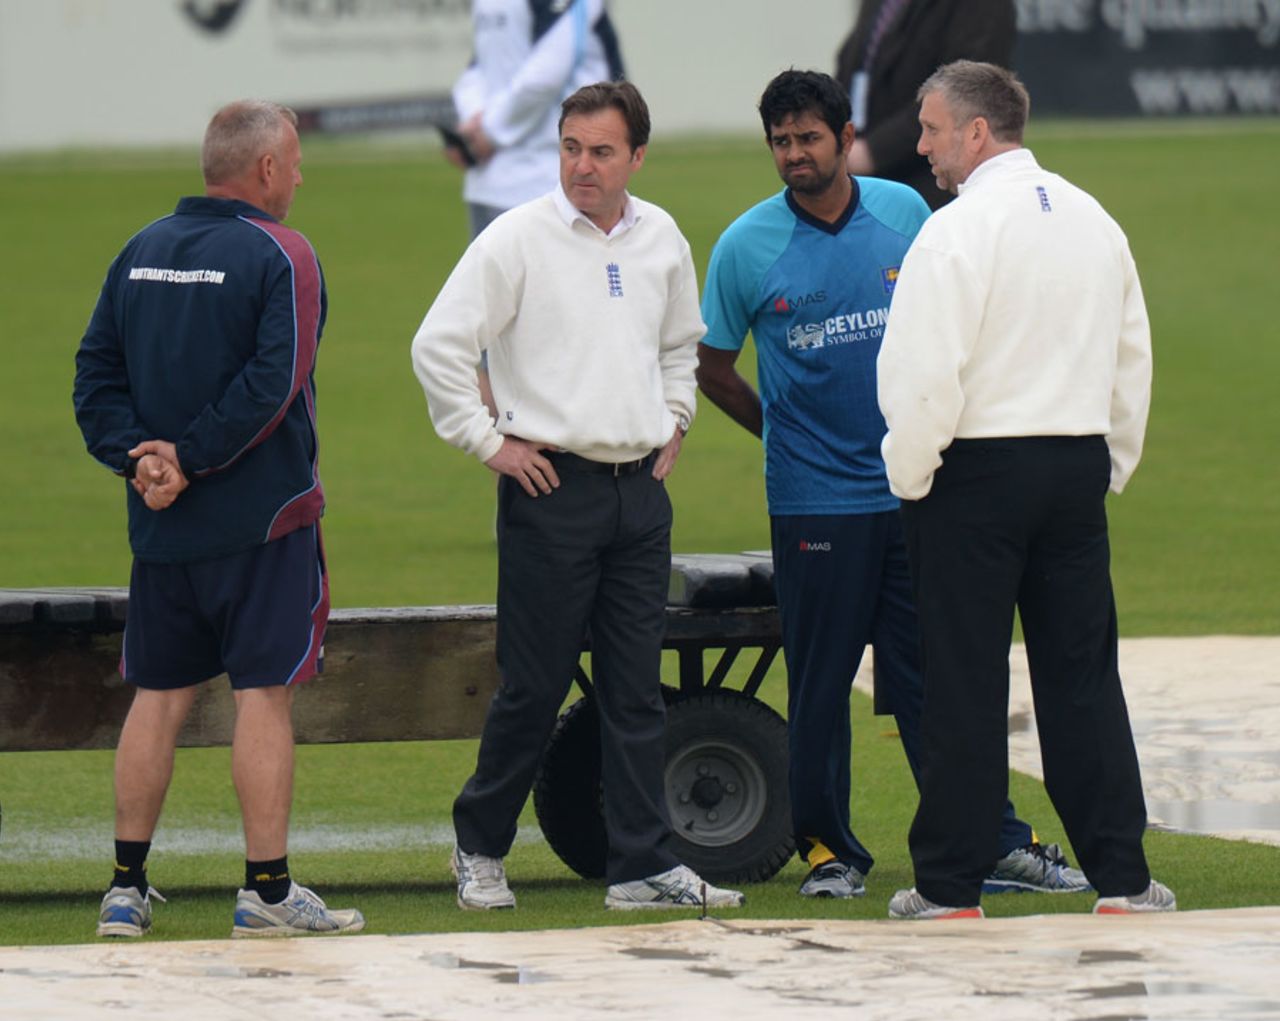 Play was abandoned after conversations between umpires, captains and groundstaff, Northamptonshire v Sri Lankans, Tour match, Wantage Road, 3rd day, June 7, 2014